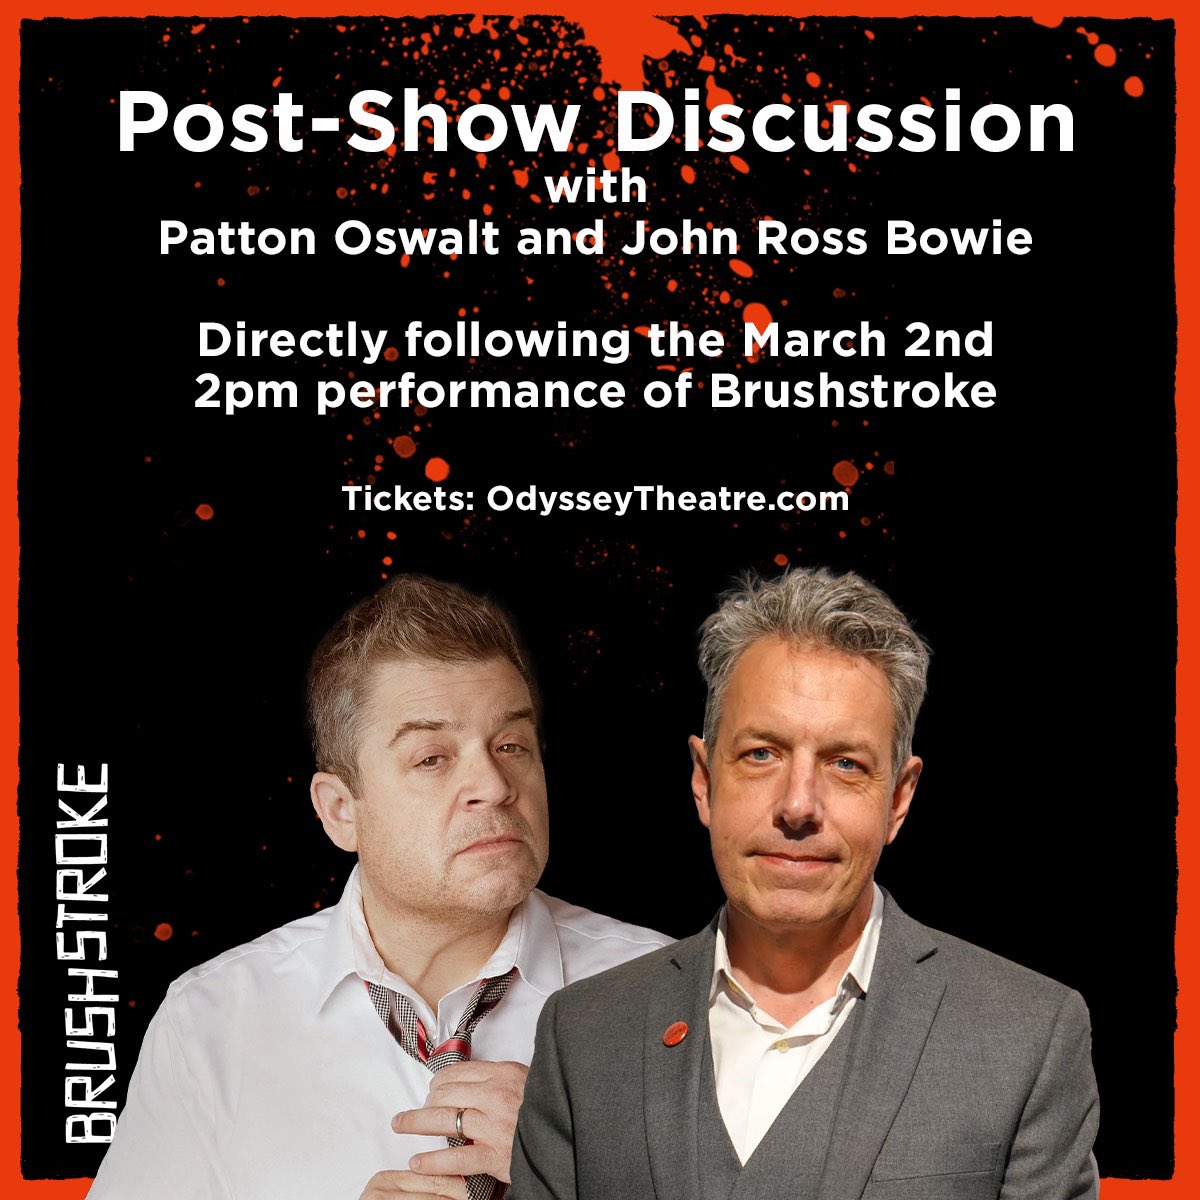 HEY LA! the WONDERFUL @pattonoswalt is moderating our post-show discussion tomorrow after the 2pm performance of BRUSHSTROKE Tickets: Tinyurl.com/BrushstrokeInLA (Save $10 with code Eggcream)